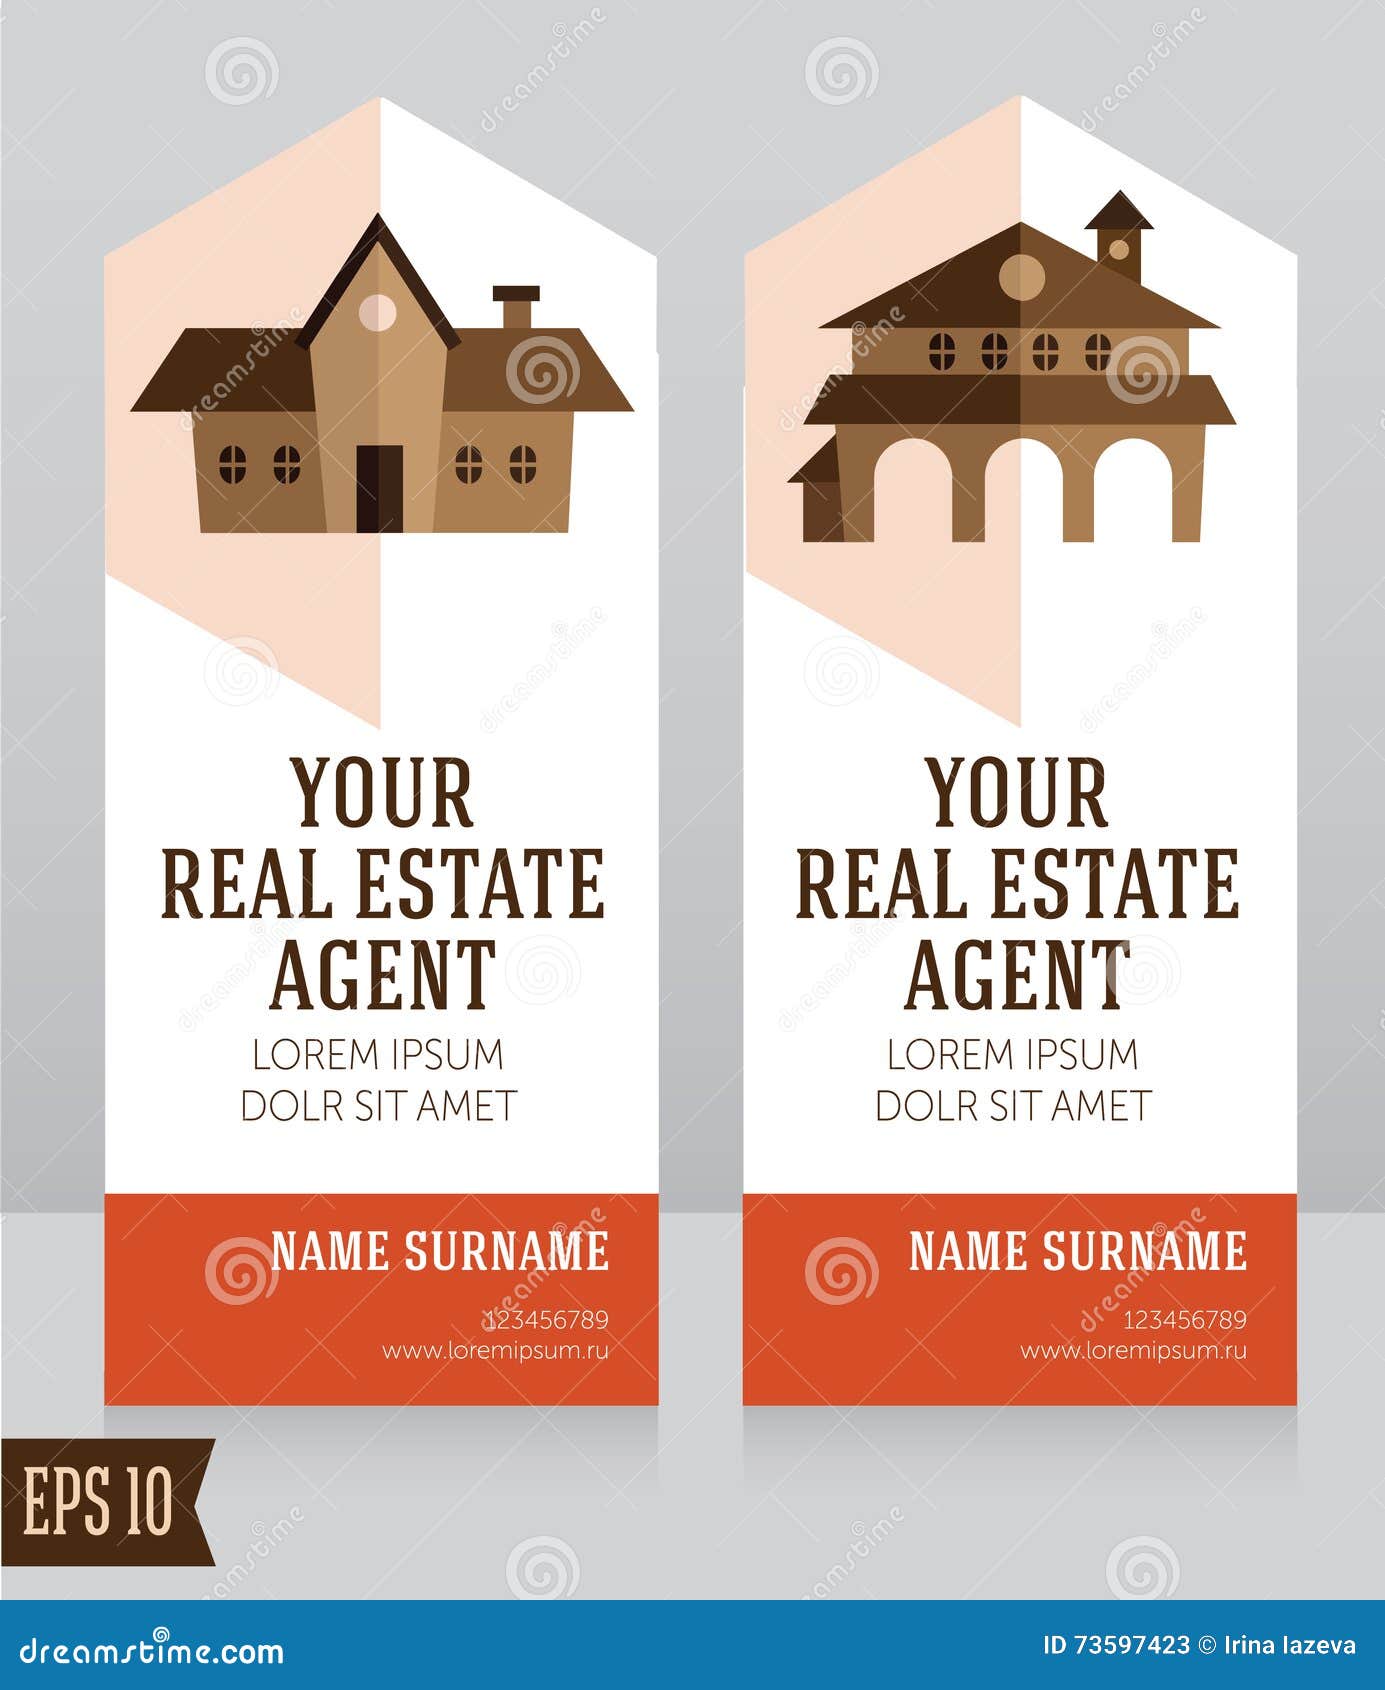 Design Template For Real Estate Agent Business Card Stock Vector With Real Estate Agent Business Card Template